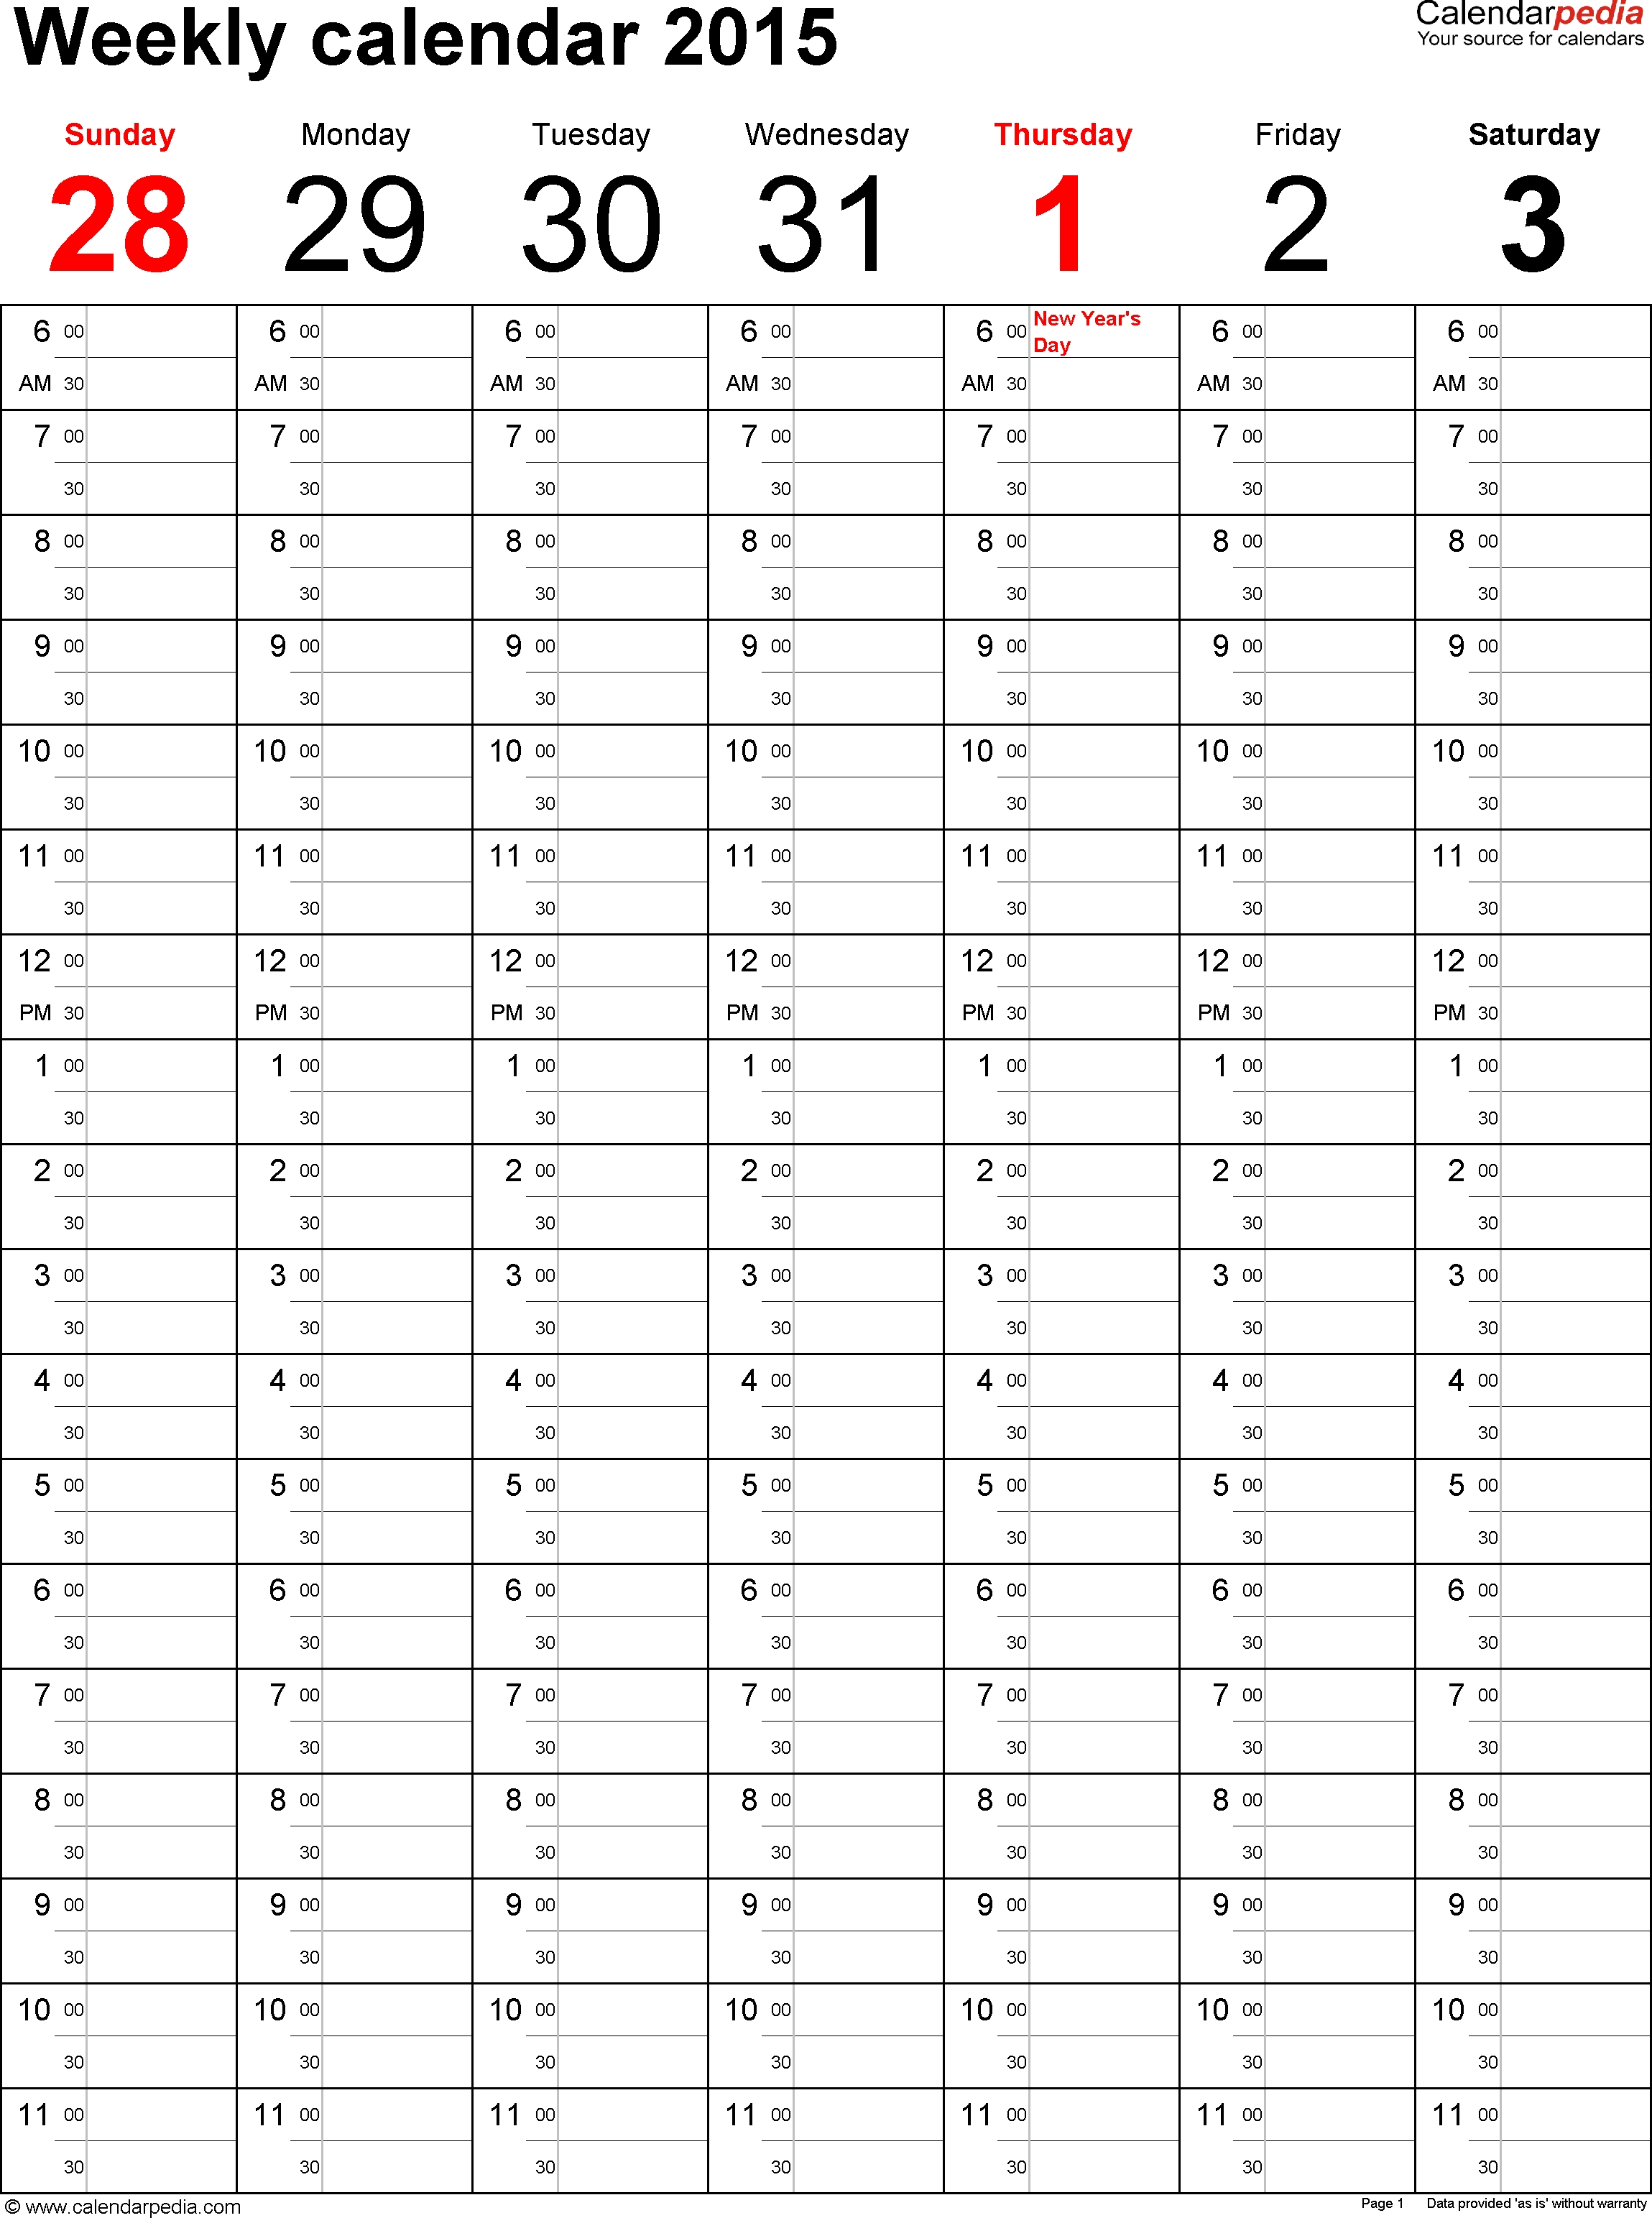 Weekly Calendars 2015 For Excel - 12 Free Printable Templates